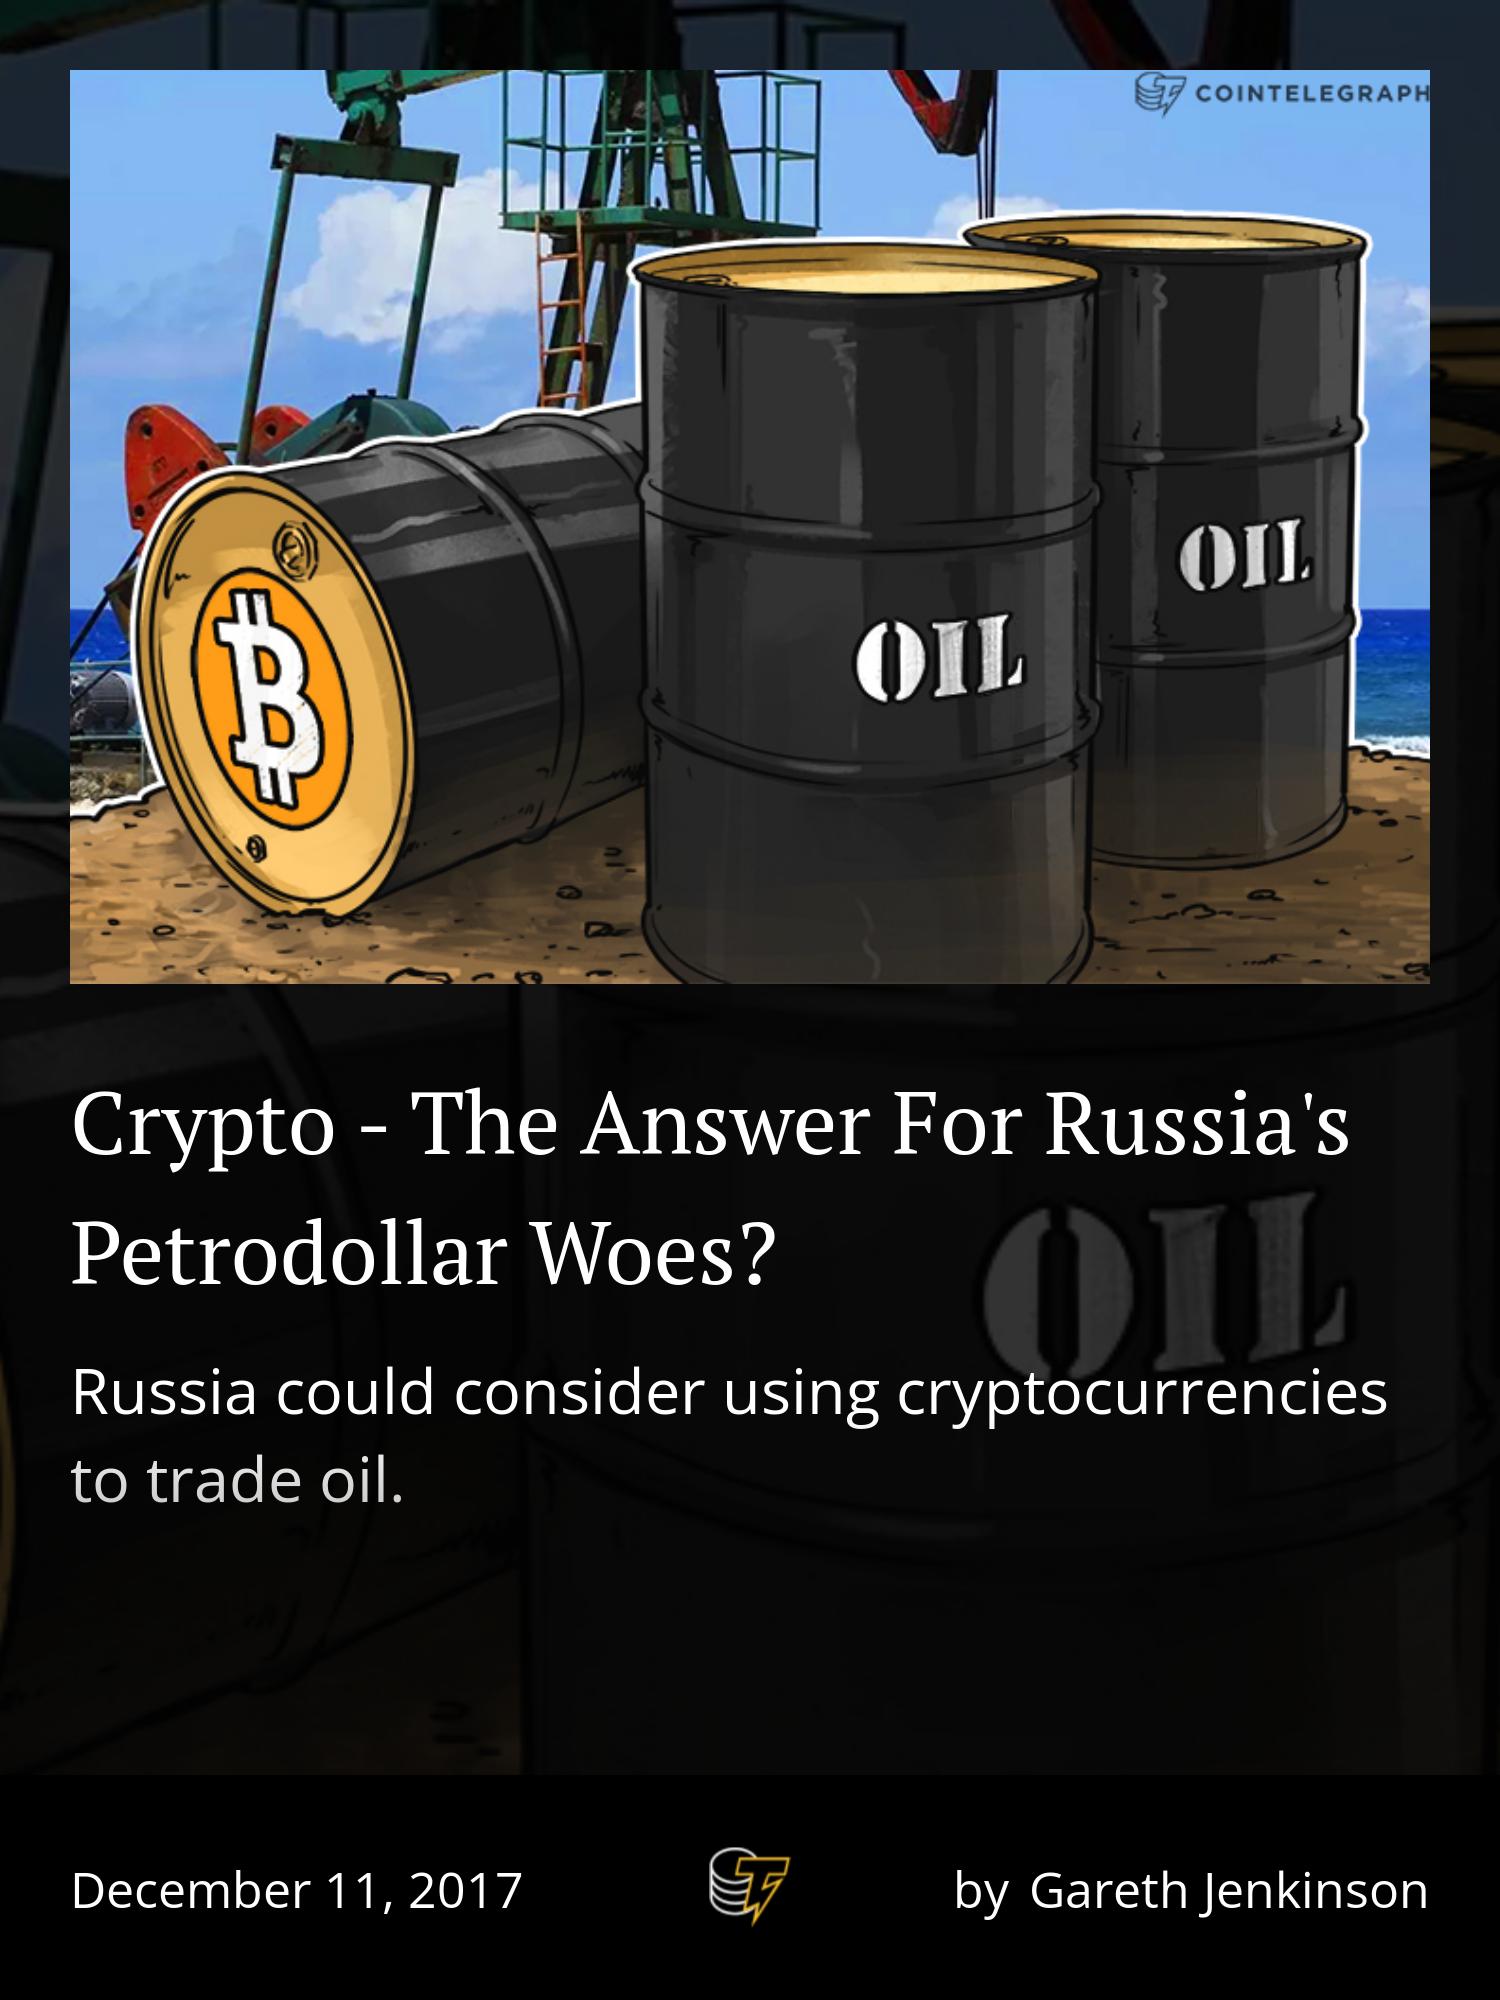 The Petrodollar and Its Discontents Point to Bitcoin's Role in the Financial Future